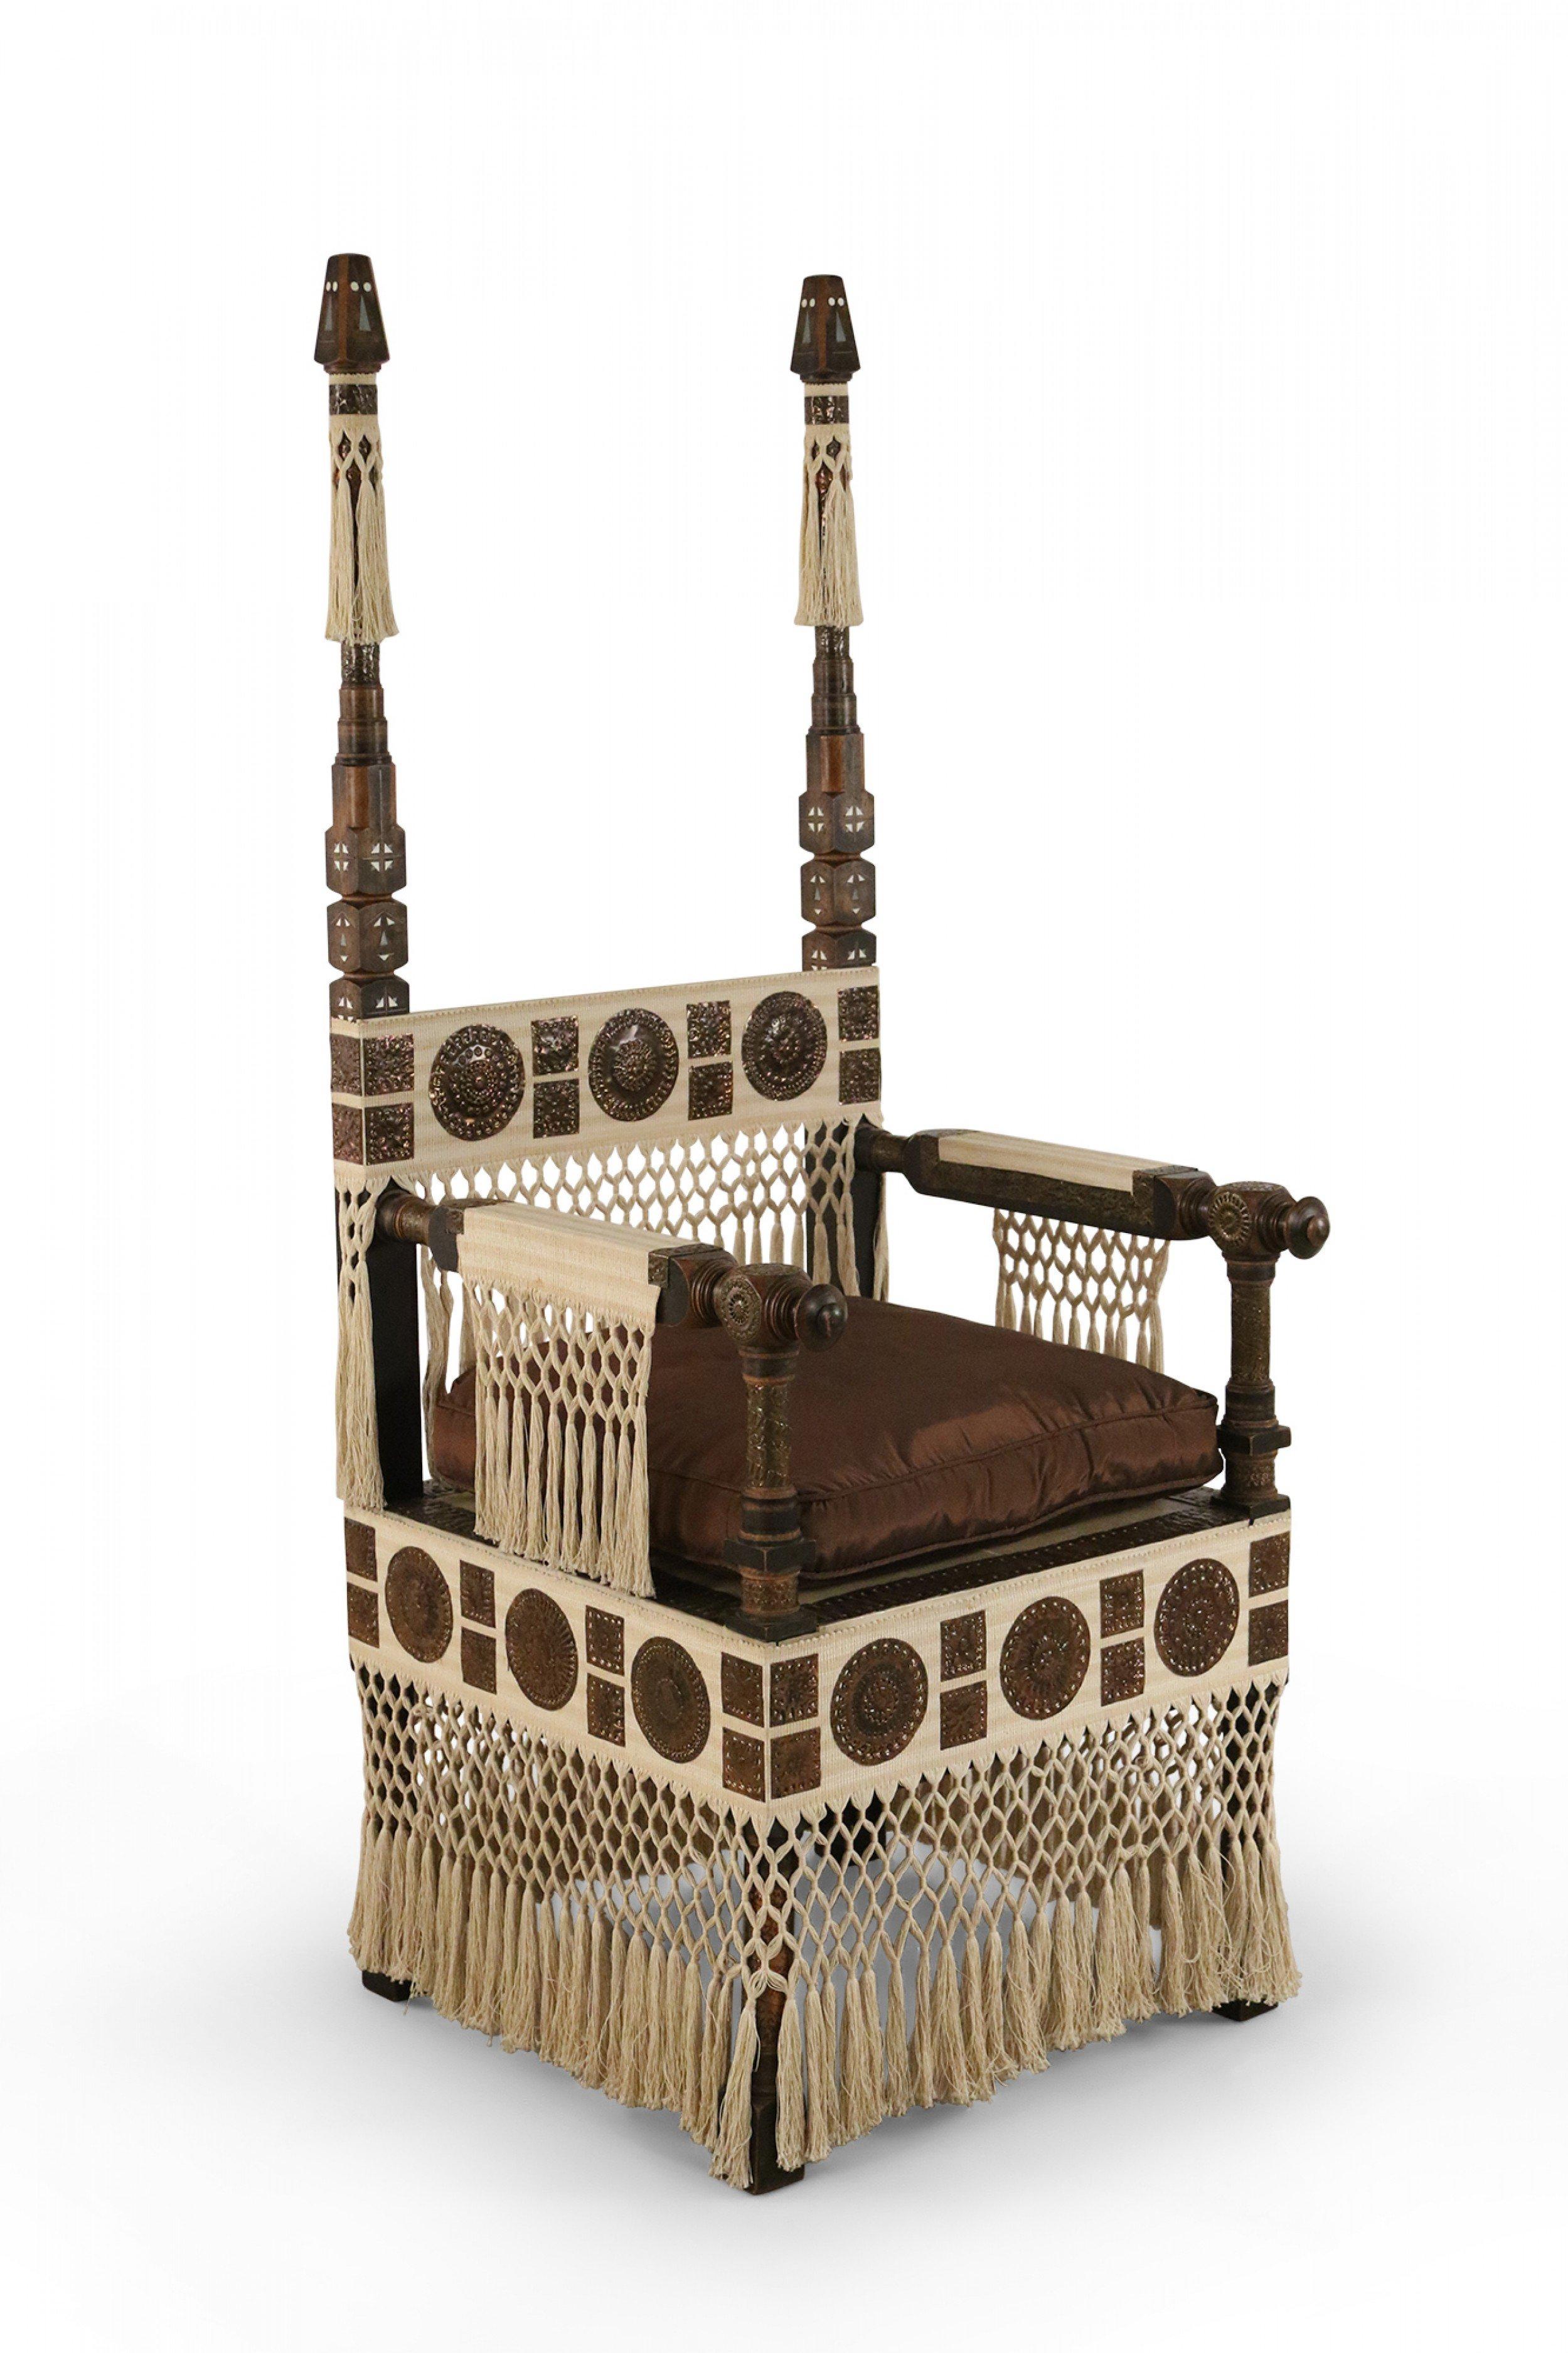 Italian Art Deco mahogany and walnut throne chair with decorative pewter and brass inlay, applied and embossed copper roundels, calfskin vellum seat with brown upholstered seat cushion, and beige fabric detail with woven tassels (Carlo Bugatti).